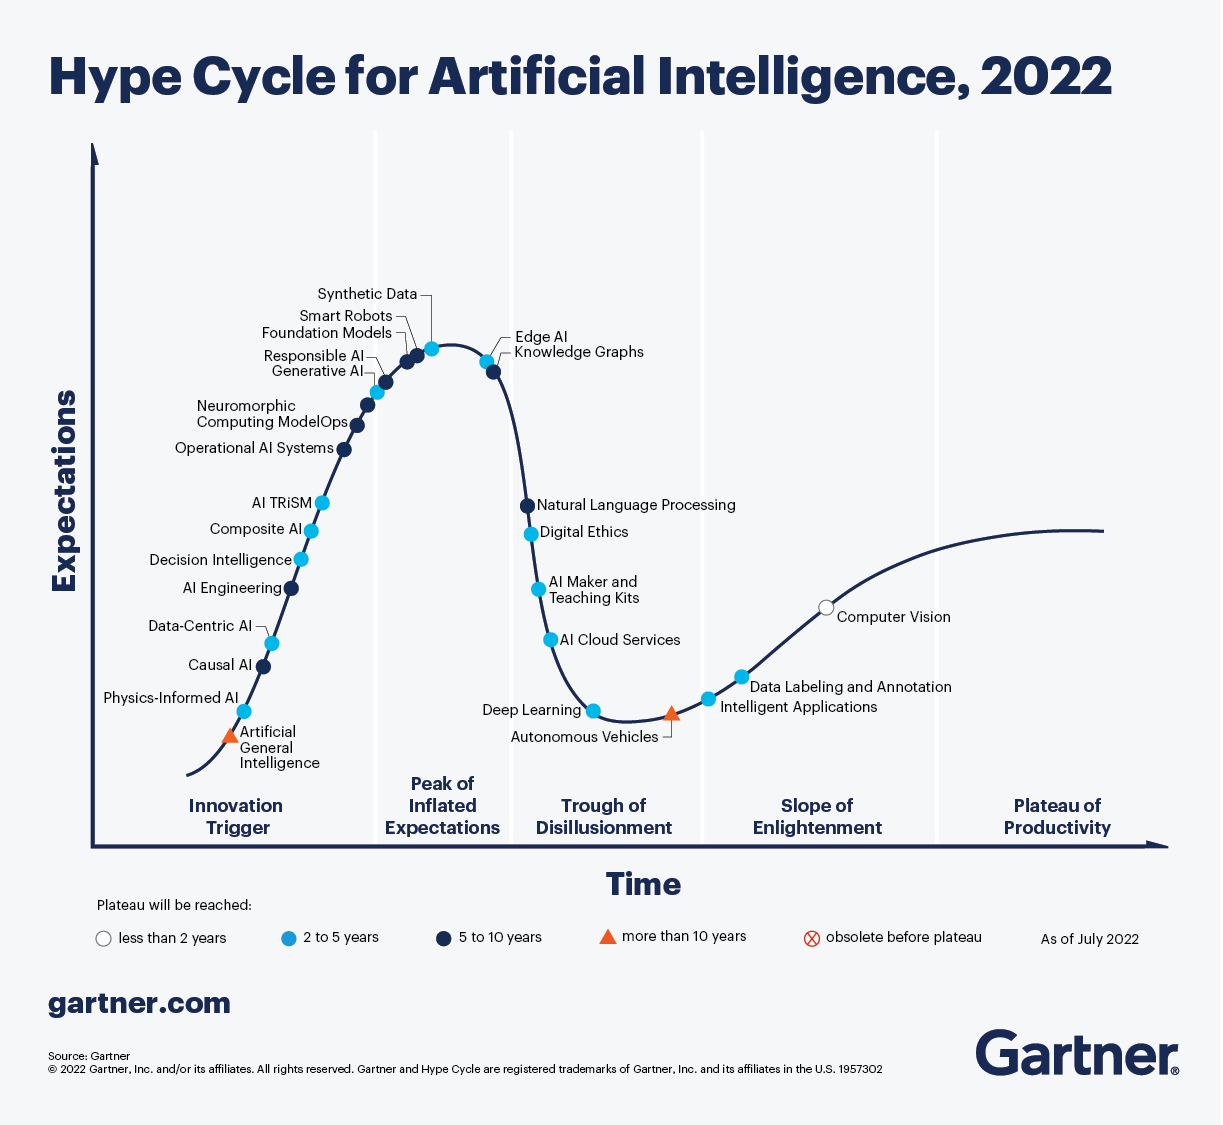 generative-ai/hype-cycle-for-artificial-intelligence-2022.png